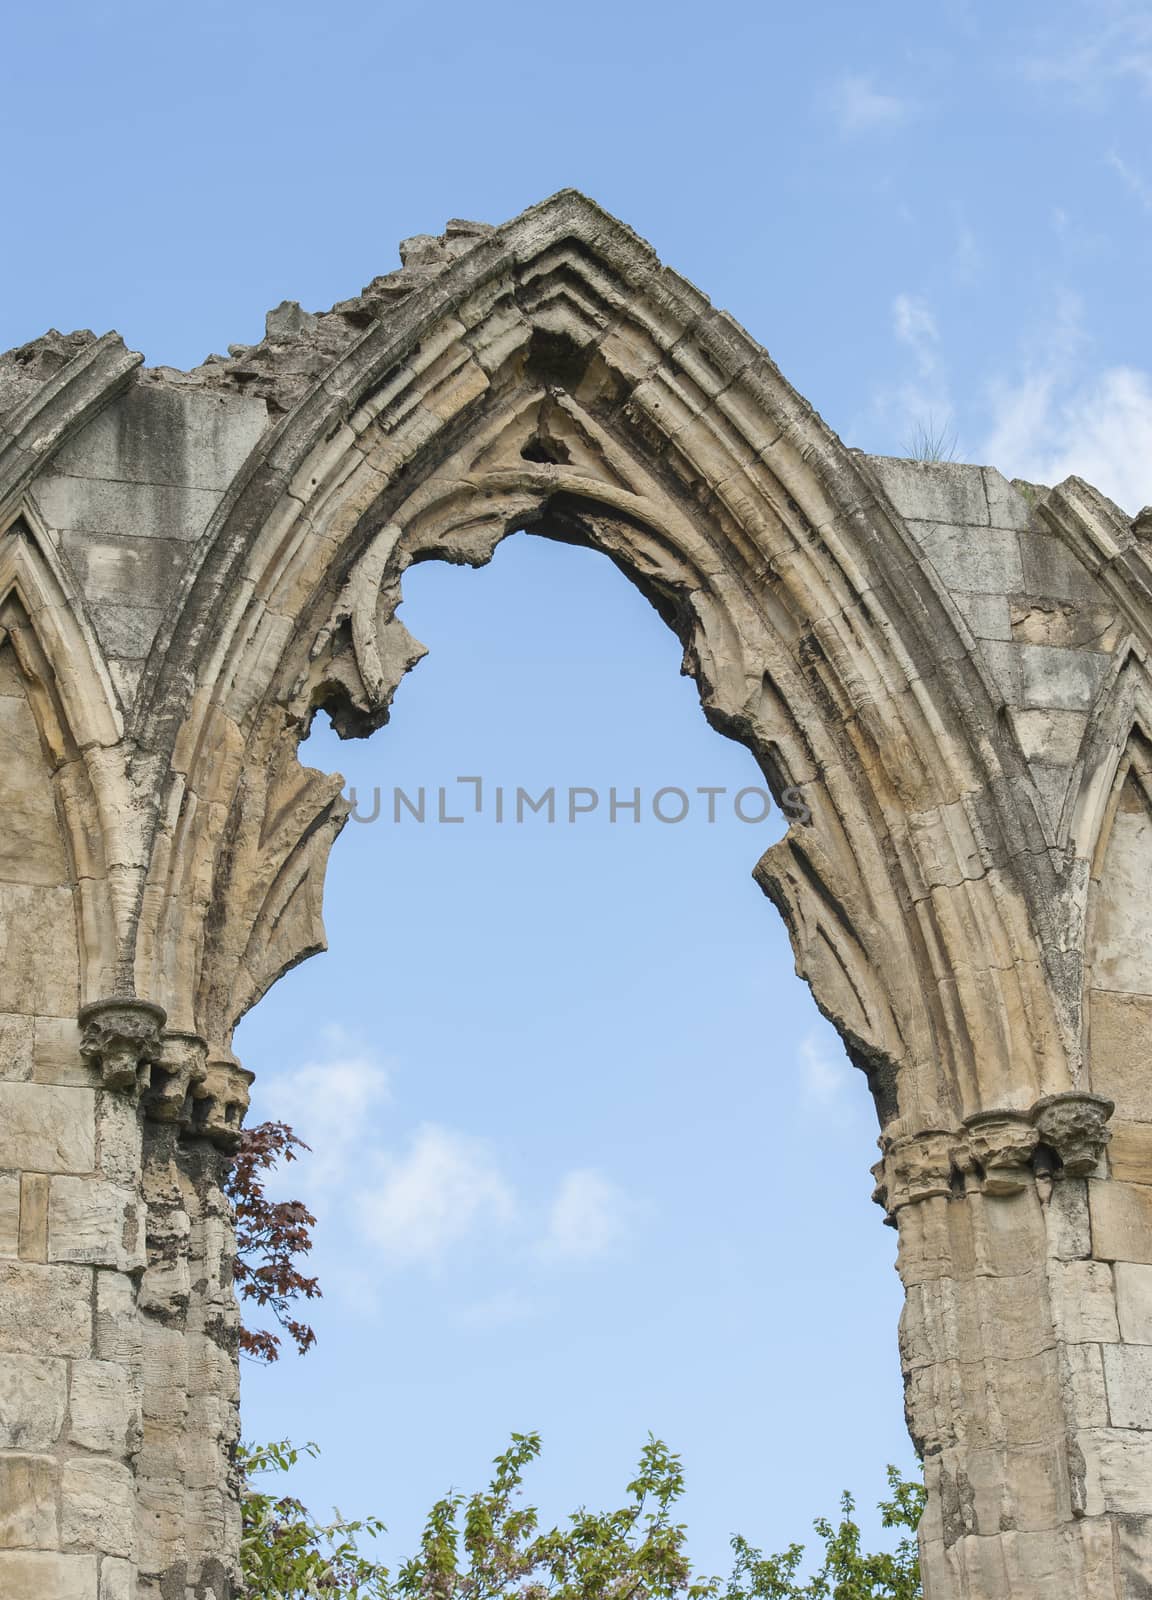 Ancient medieval church ruins against blue sky in english city center